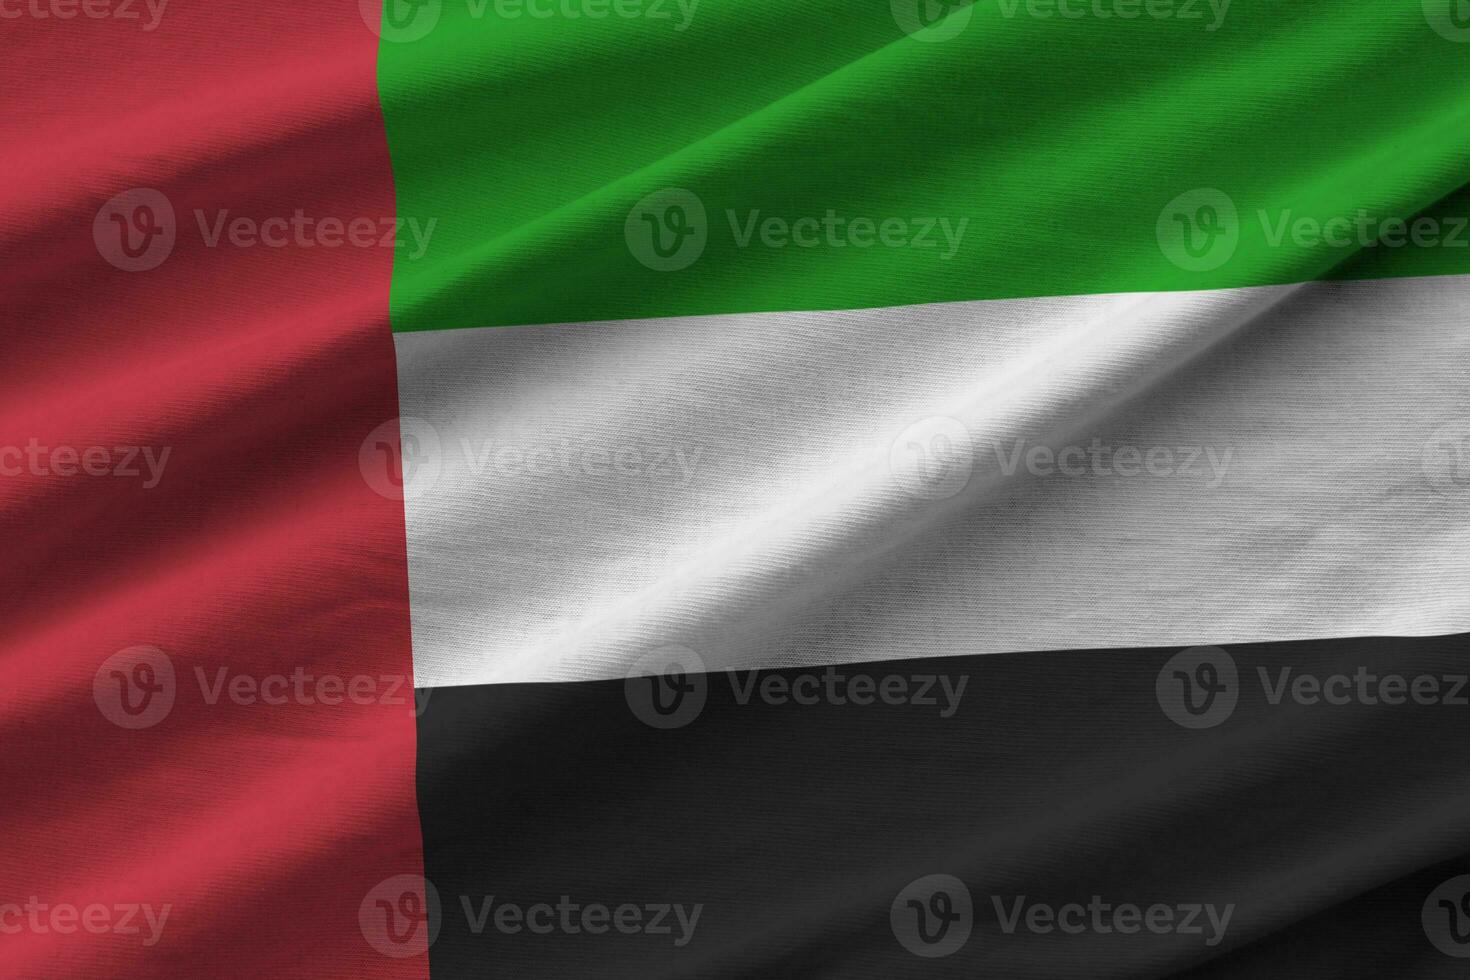 United Arab Emirates flag with big folds waving close up under the studio light indoors. The official symbols and colors in banner photo